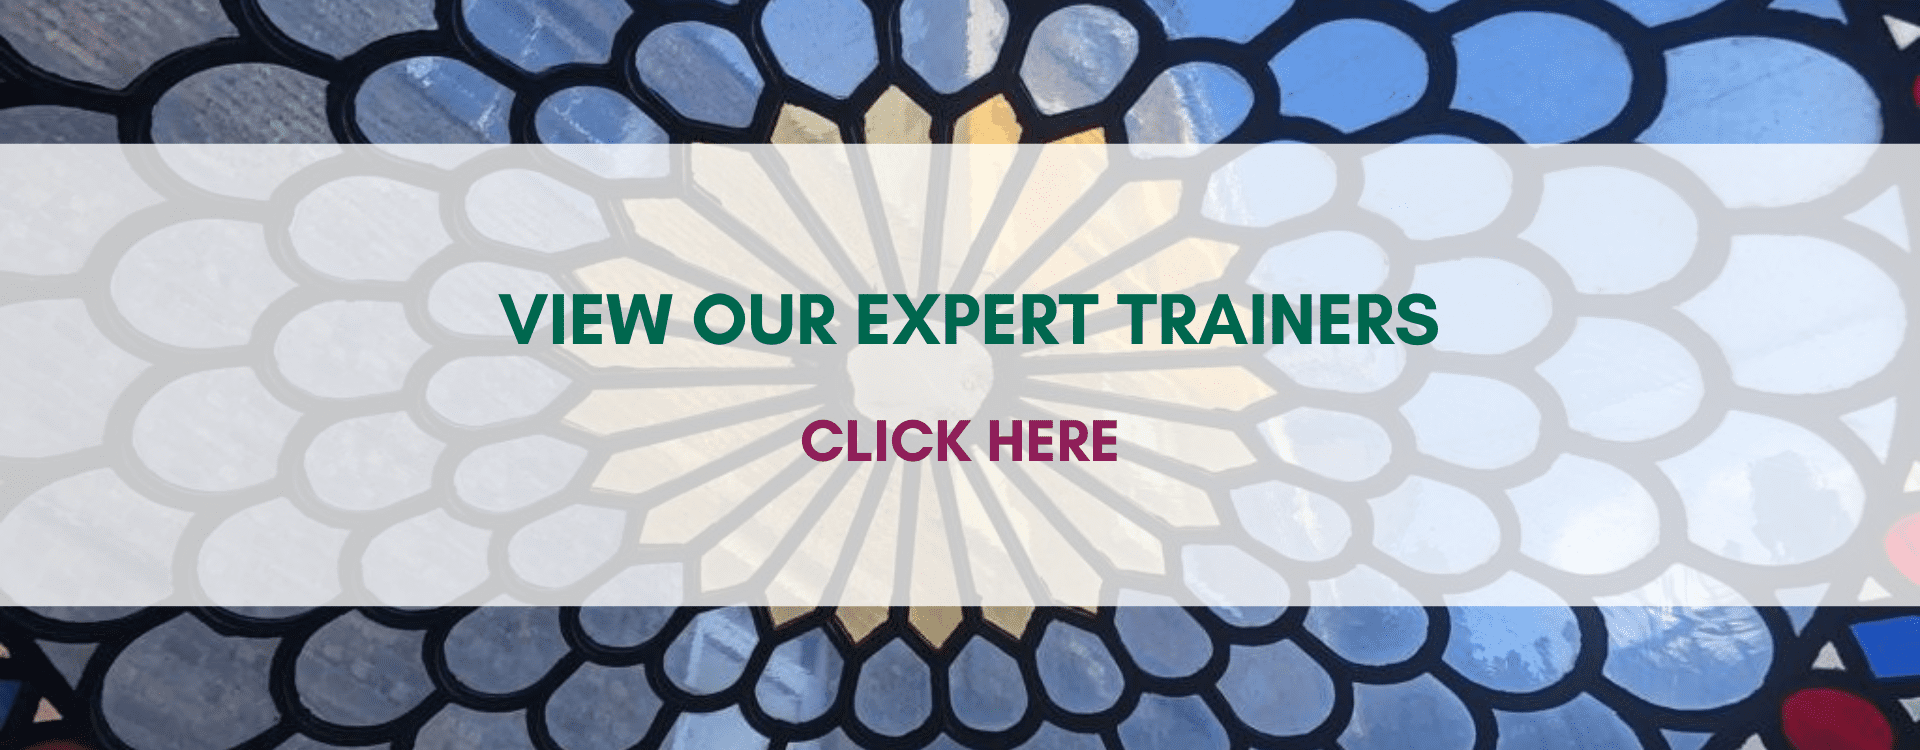 Expert Trainers - Mobile